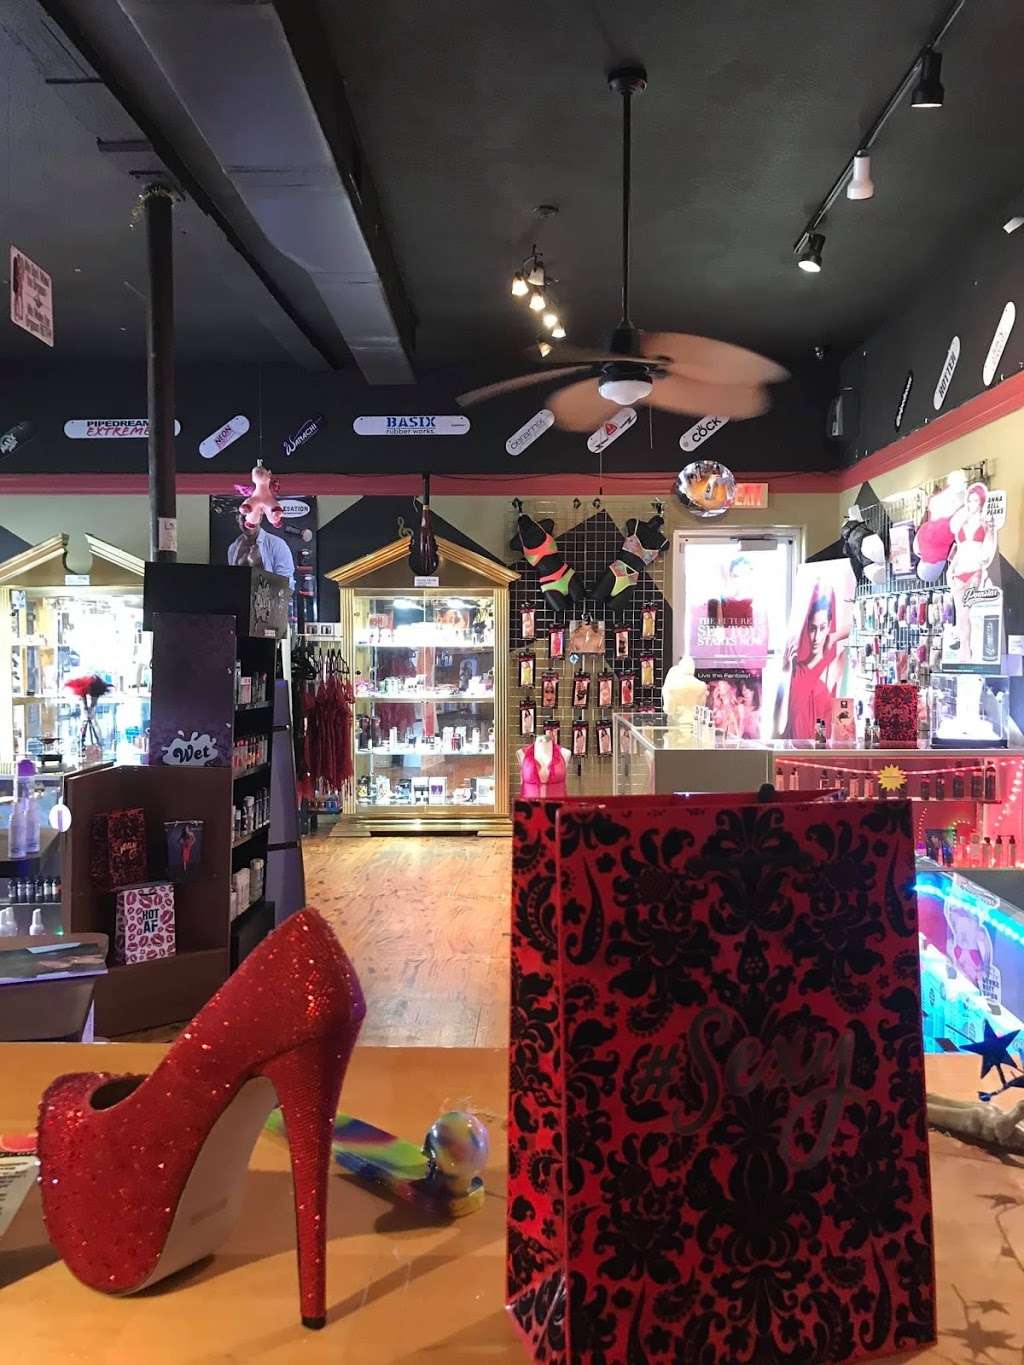 Wild Things Lingerie & Adult Novelty Store - clothing store  | Photo 1 of 9 | Address: 5340 E Silver Springs Blvd, Silver Springs, FL 34488, USA | Phone: (352) 236-5298